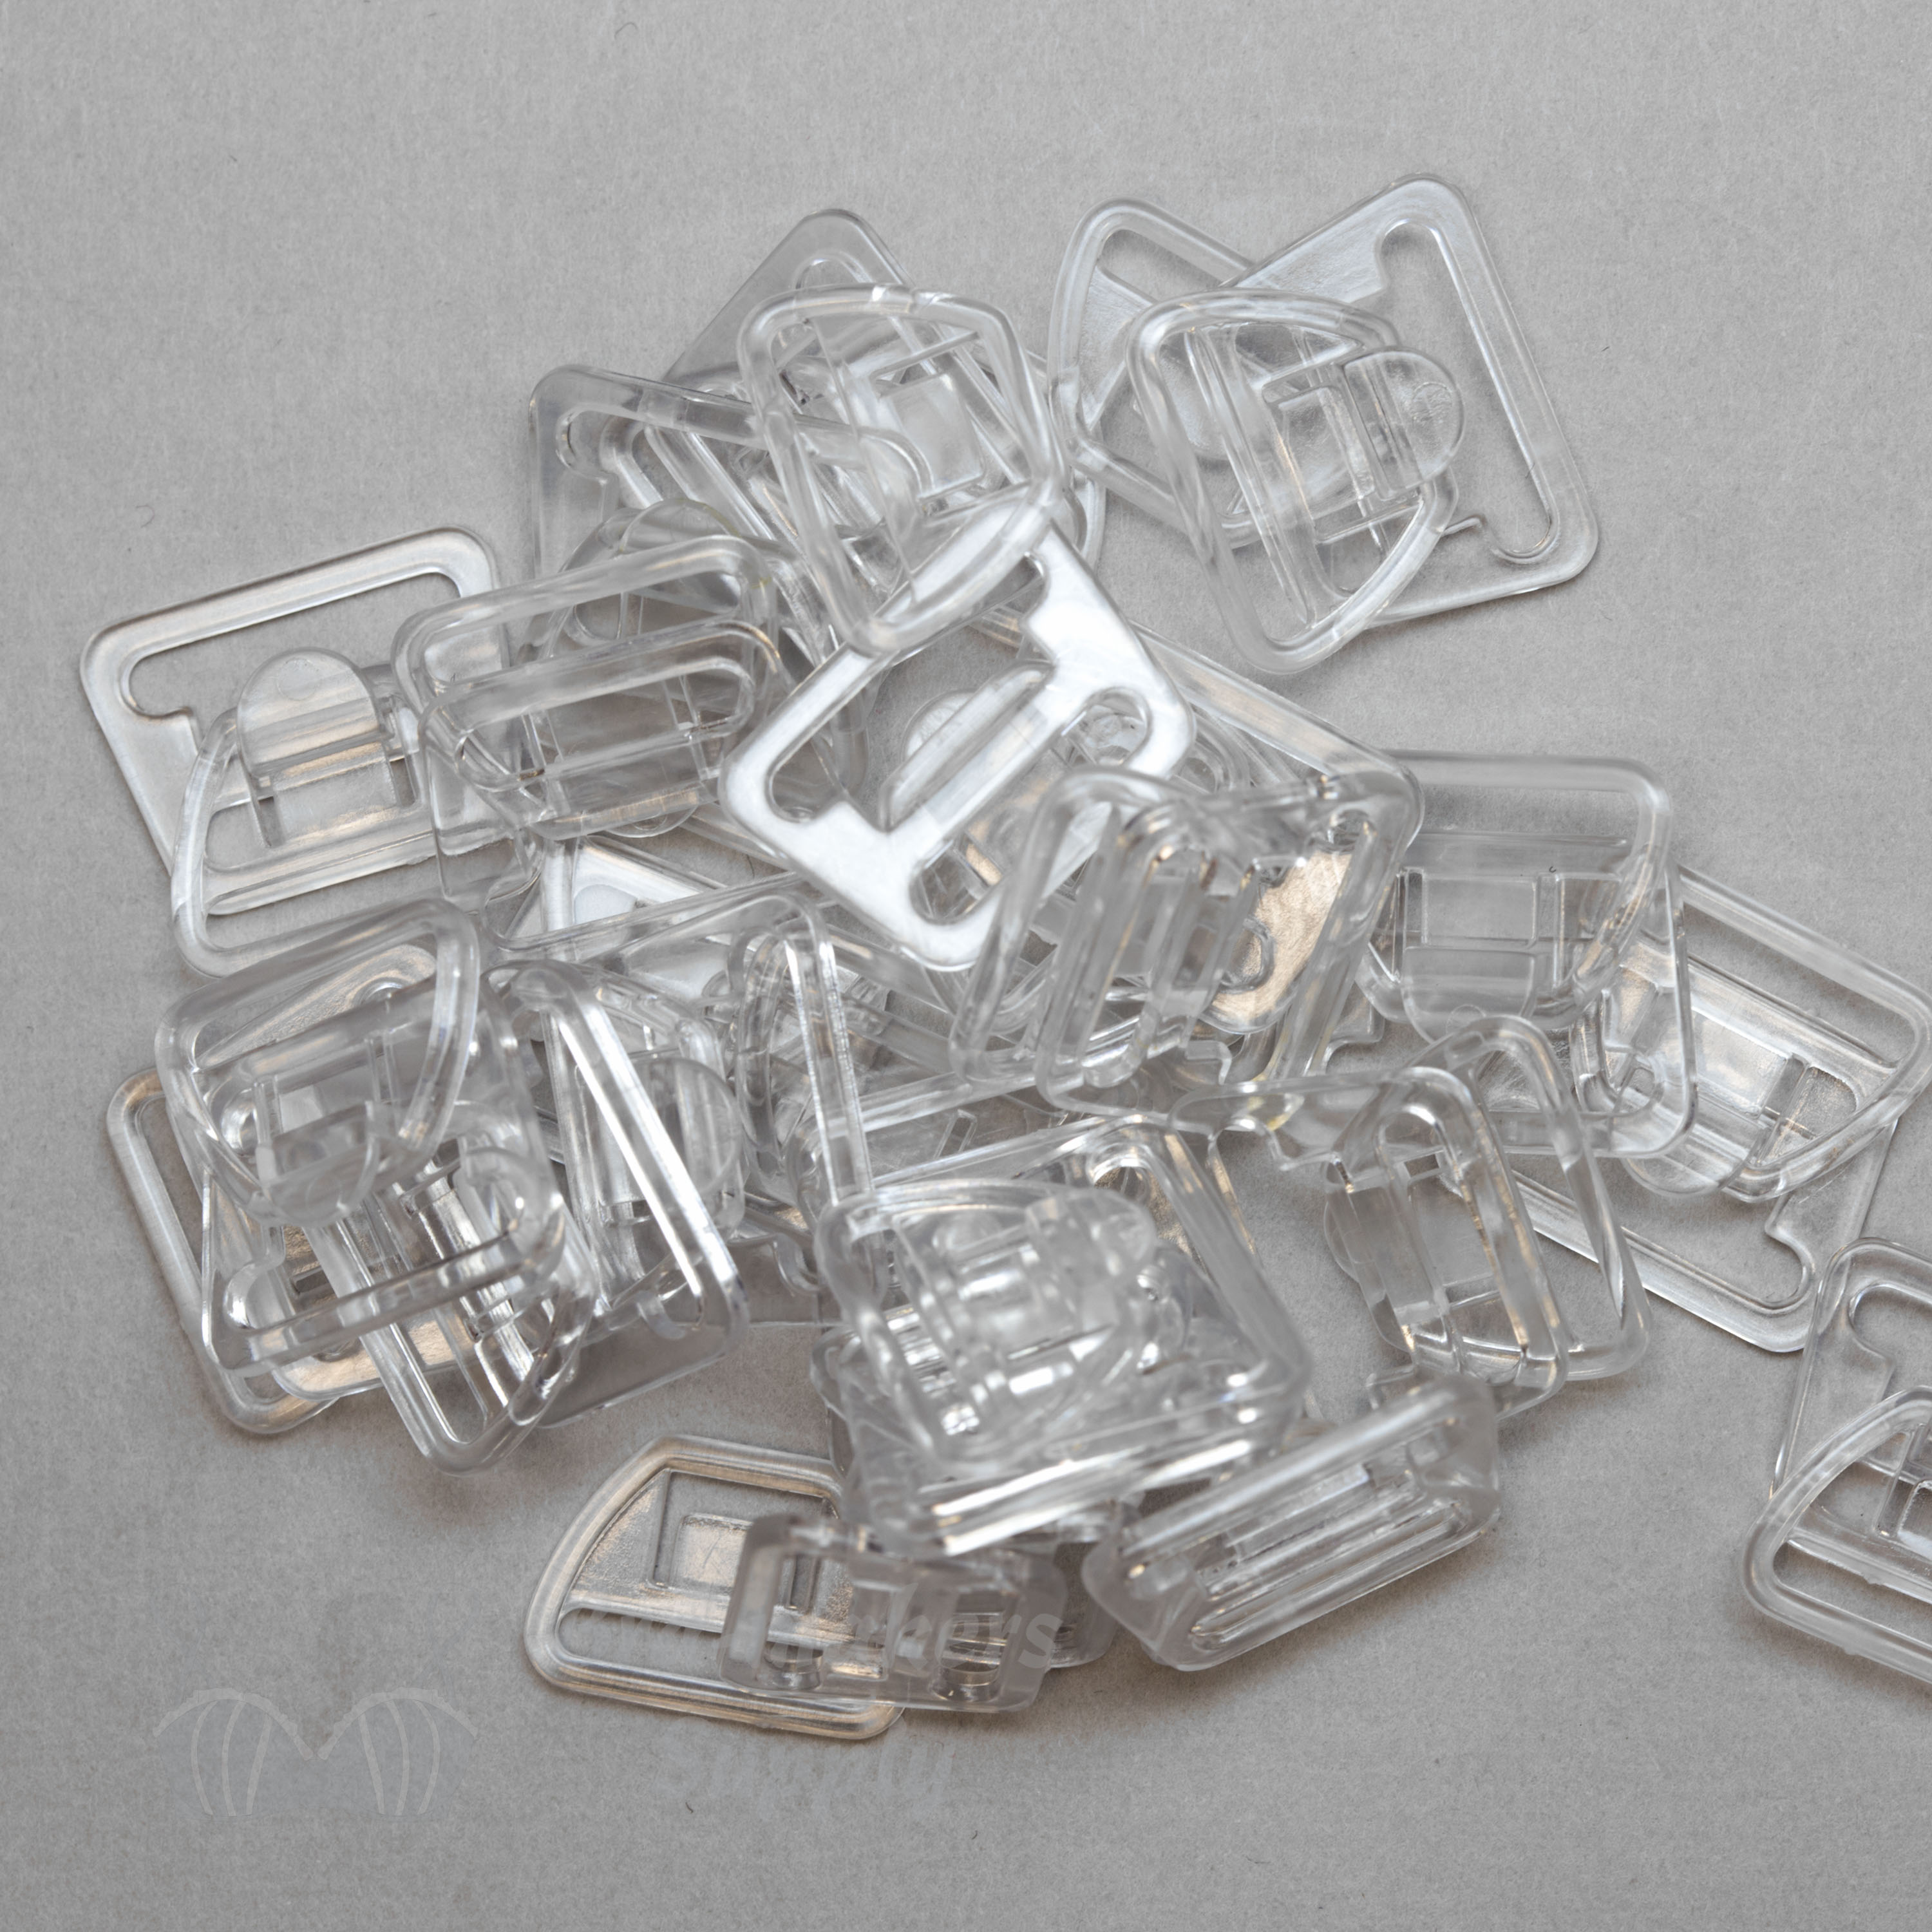 NBEADS 100 Pairs Plastic Hooks Buckles, Snaps Nursing Maternity Clips  Clasps for DIY Breastfeeding Bras Camis and Tank Tops